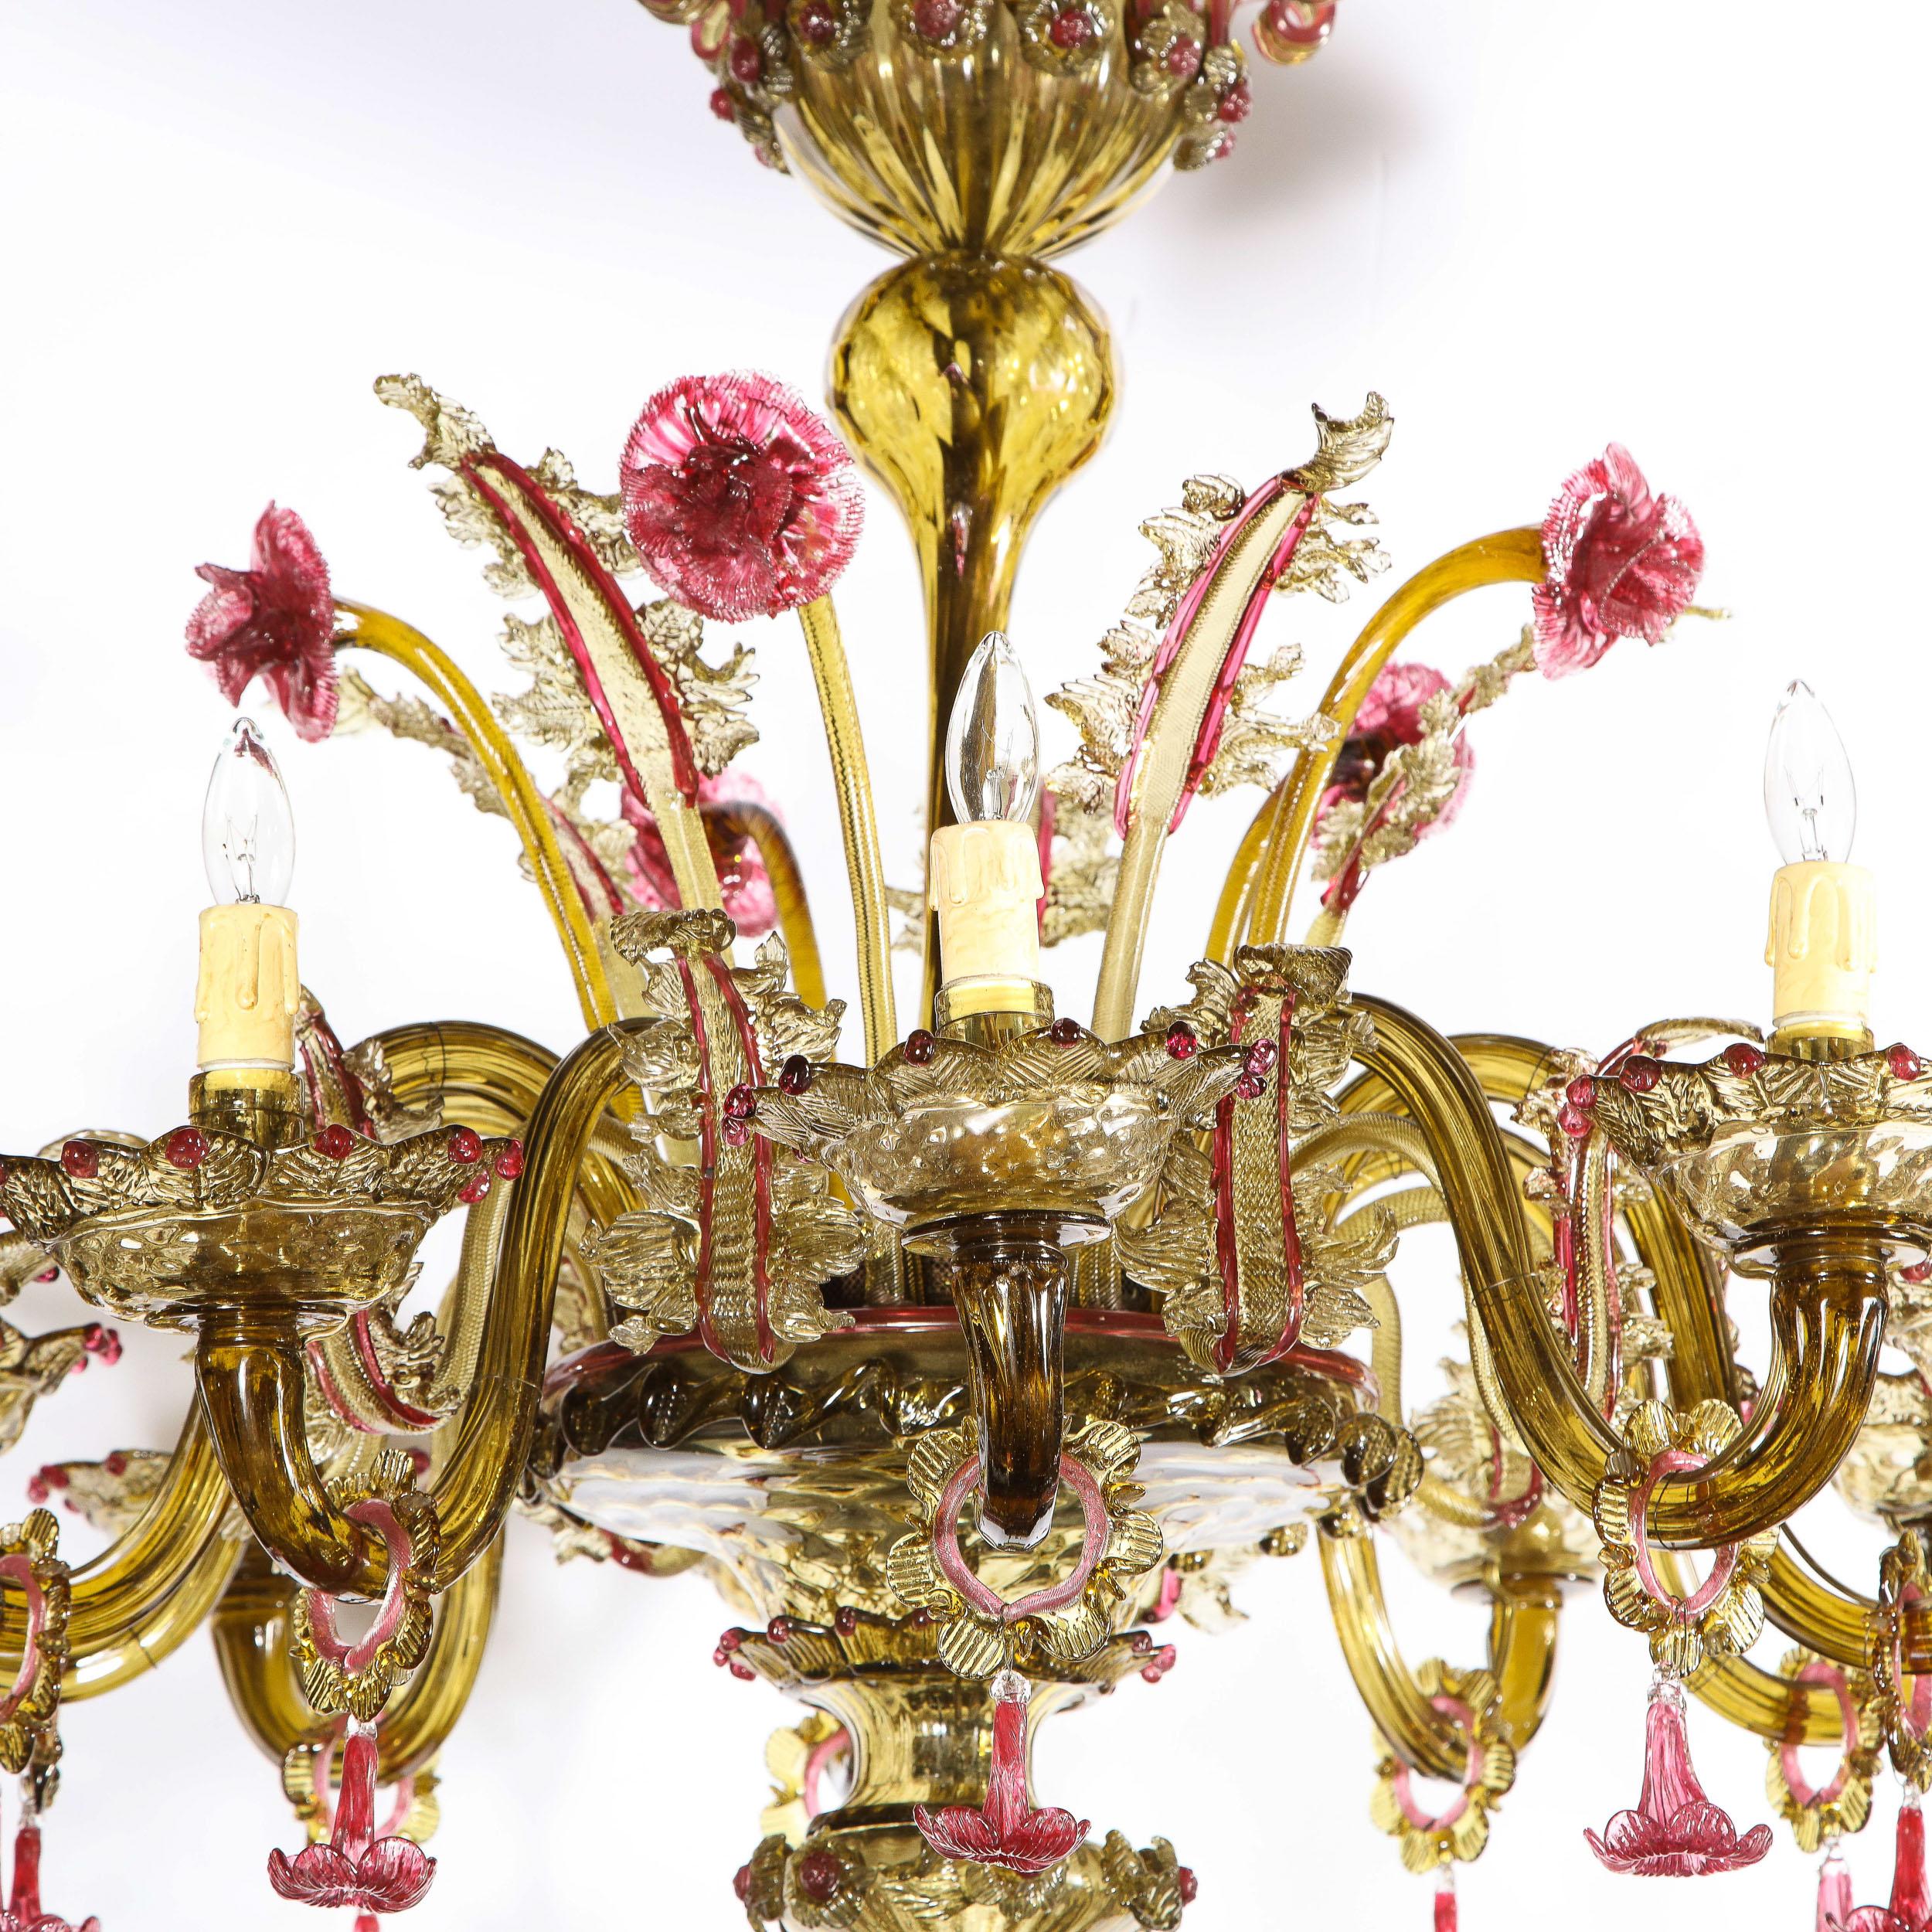 This gorgeous Art Deco chandelier was handblown in Murano, Italy- the island off the coast of Venice renowned for centuries for its superlative glass production- circa 1940. The chandelier features ten undulating sculptural smoked amber Murano arms